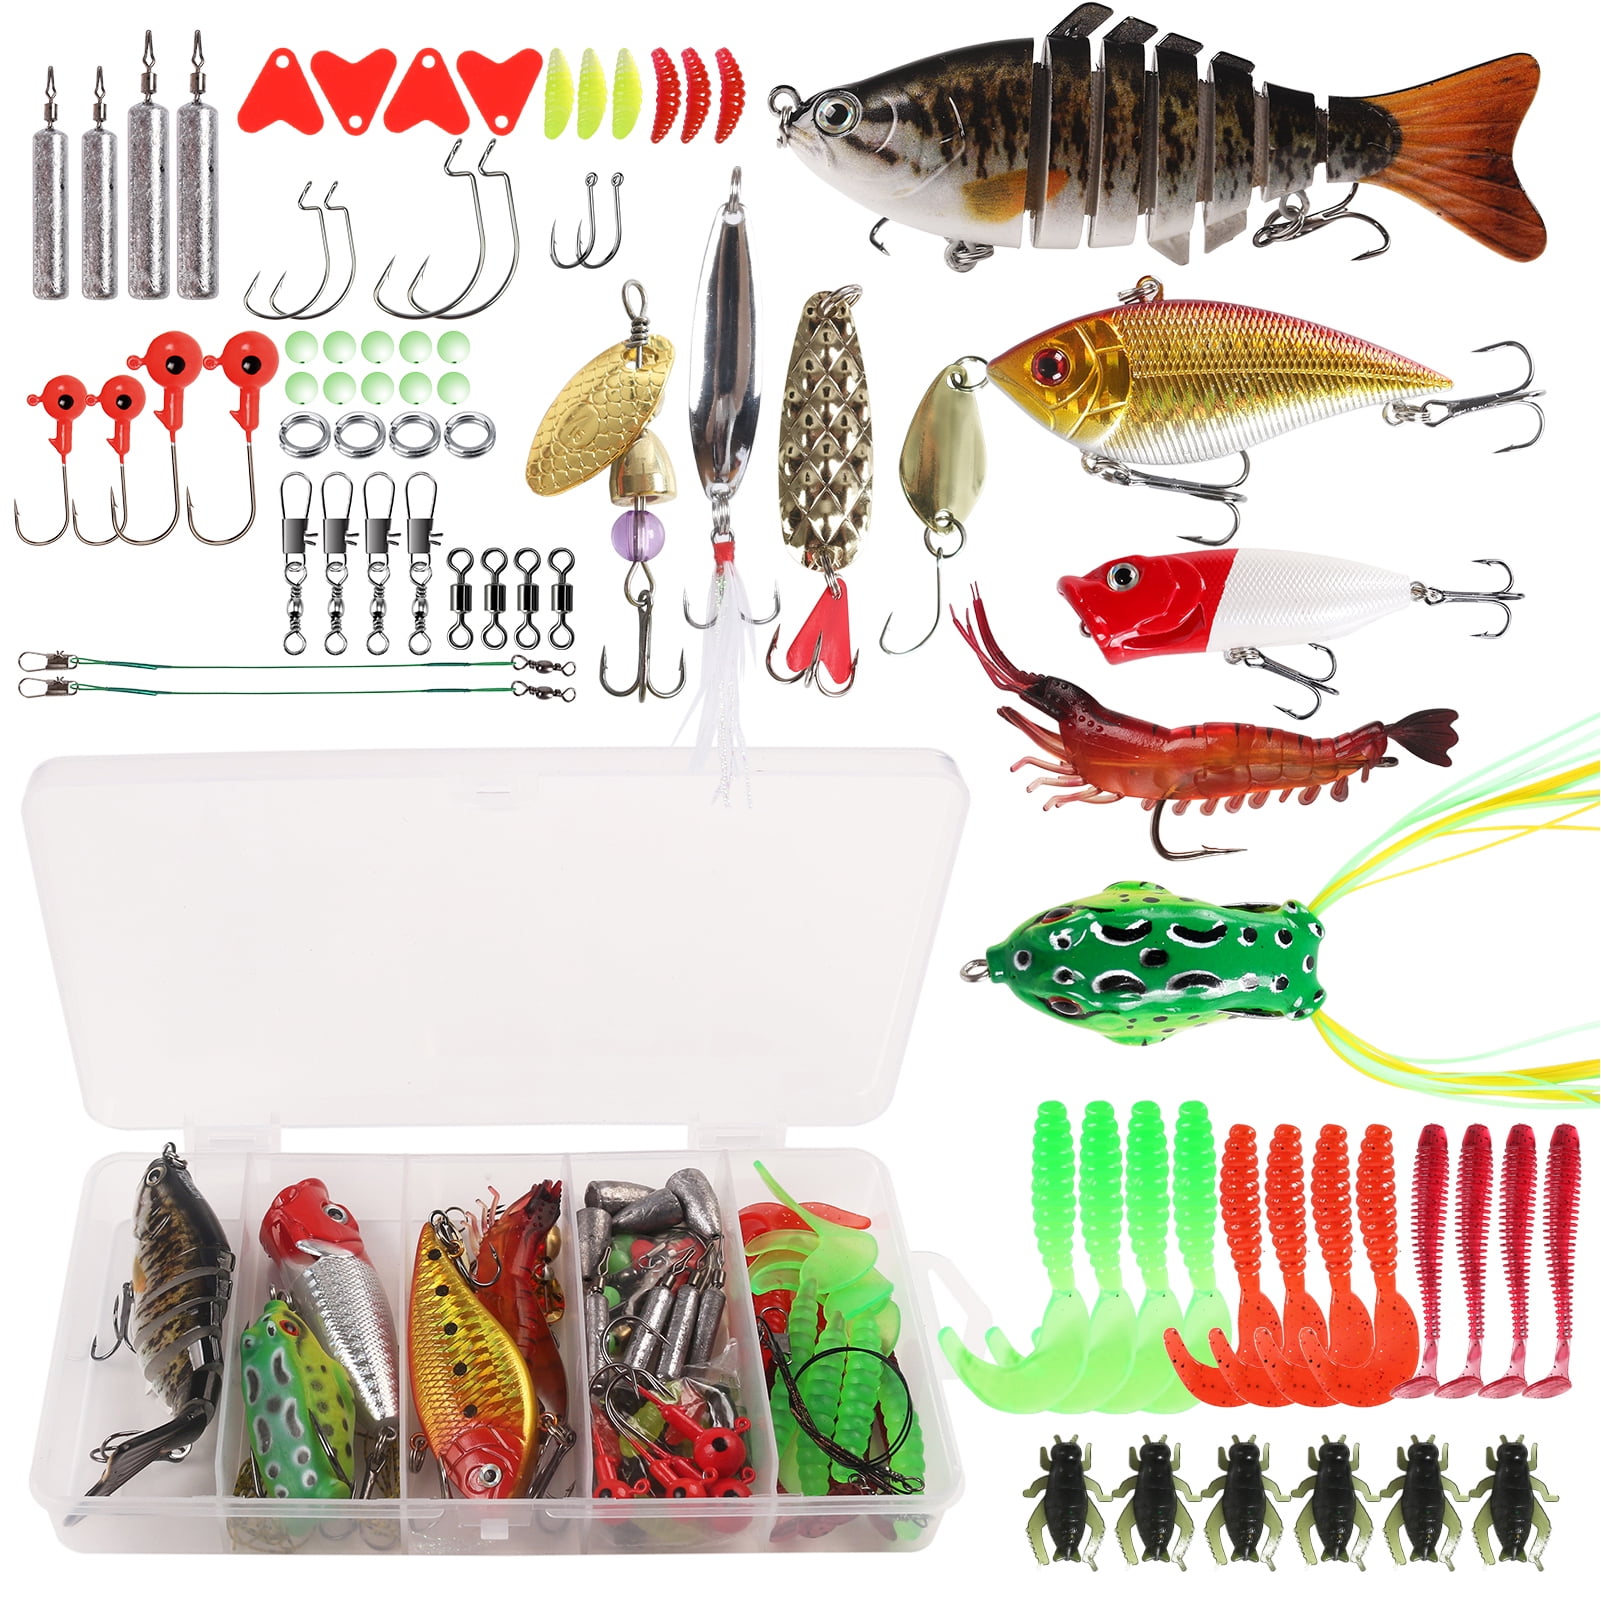 Arealer 83pcs Fishing Lures Kit for Bass Trout Salmon Fishing Accessories  Tackle Tool Fishing Baits Swivels Hooks